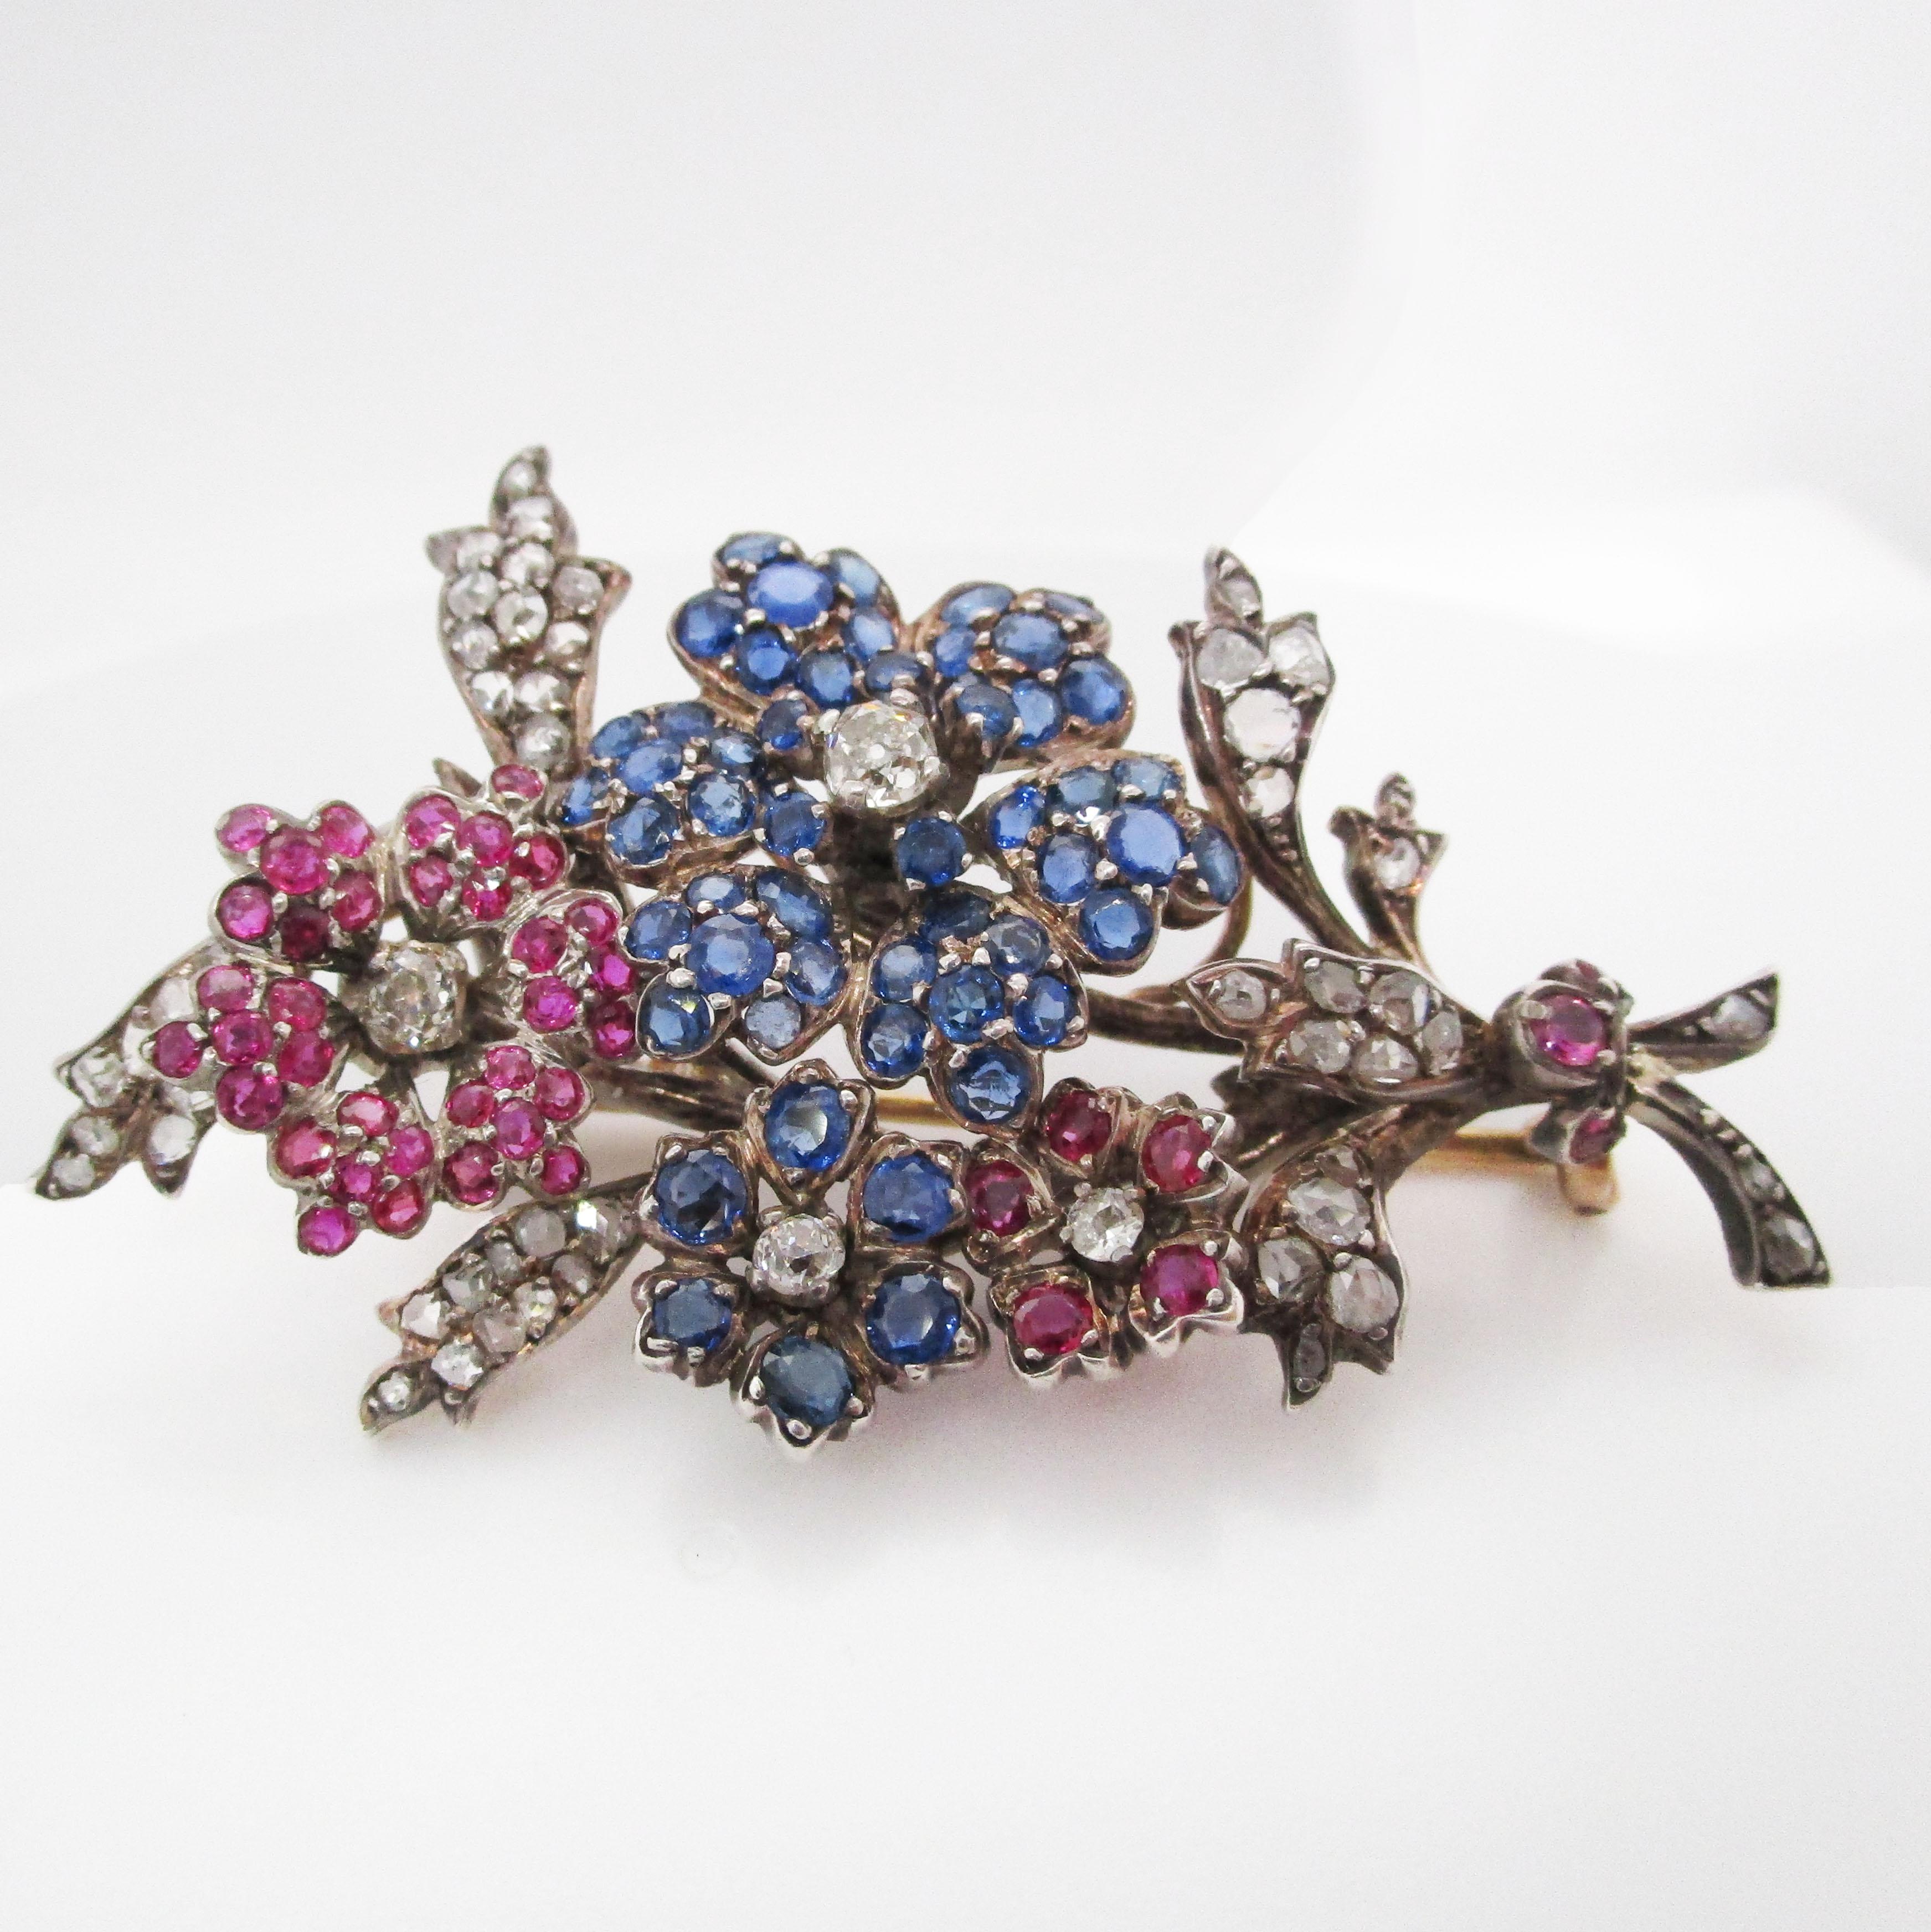 This absolutely enchanting brooch features a jaw-dropping combination of rubies, diamonds, and sapphires set into silver on 14k gold in a gorgeous Victorian brooch from 1880. The layout of the brooch creates the illusion of a dimensional bouquet